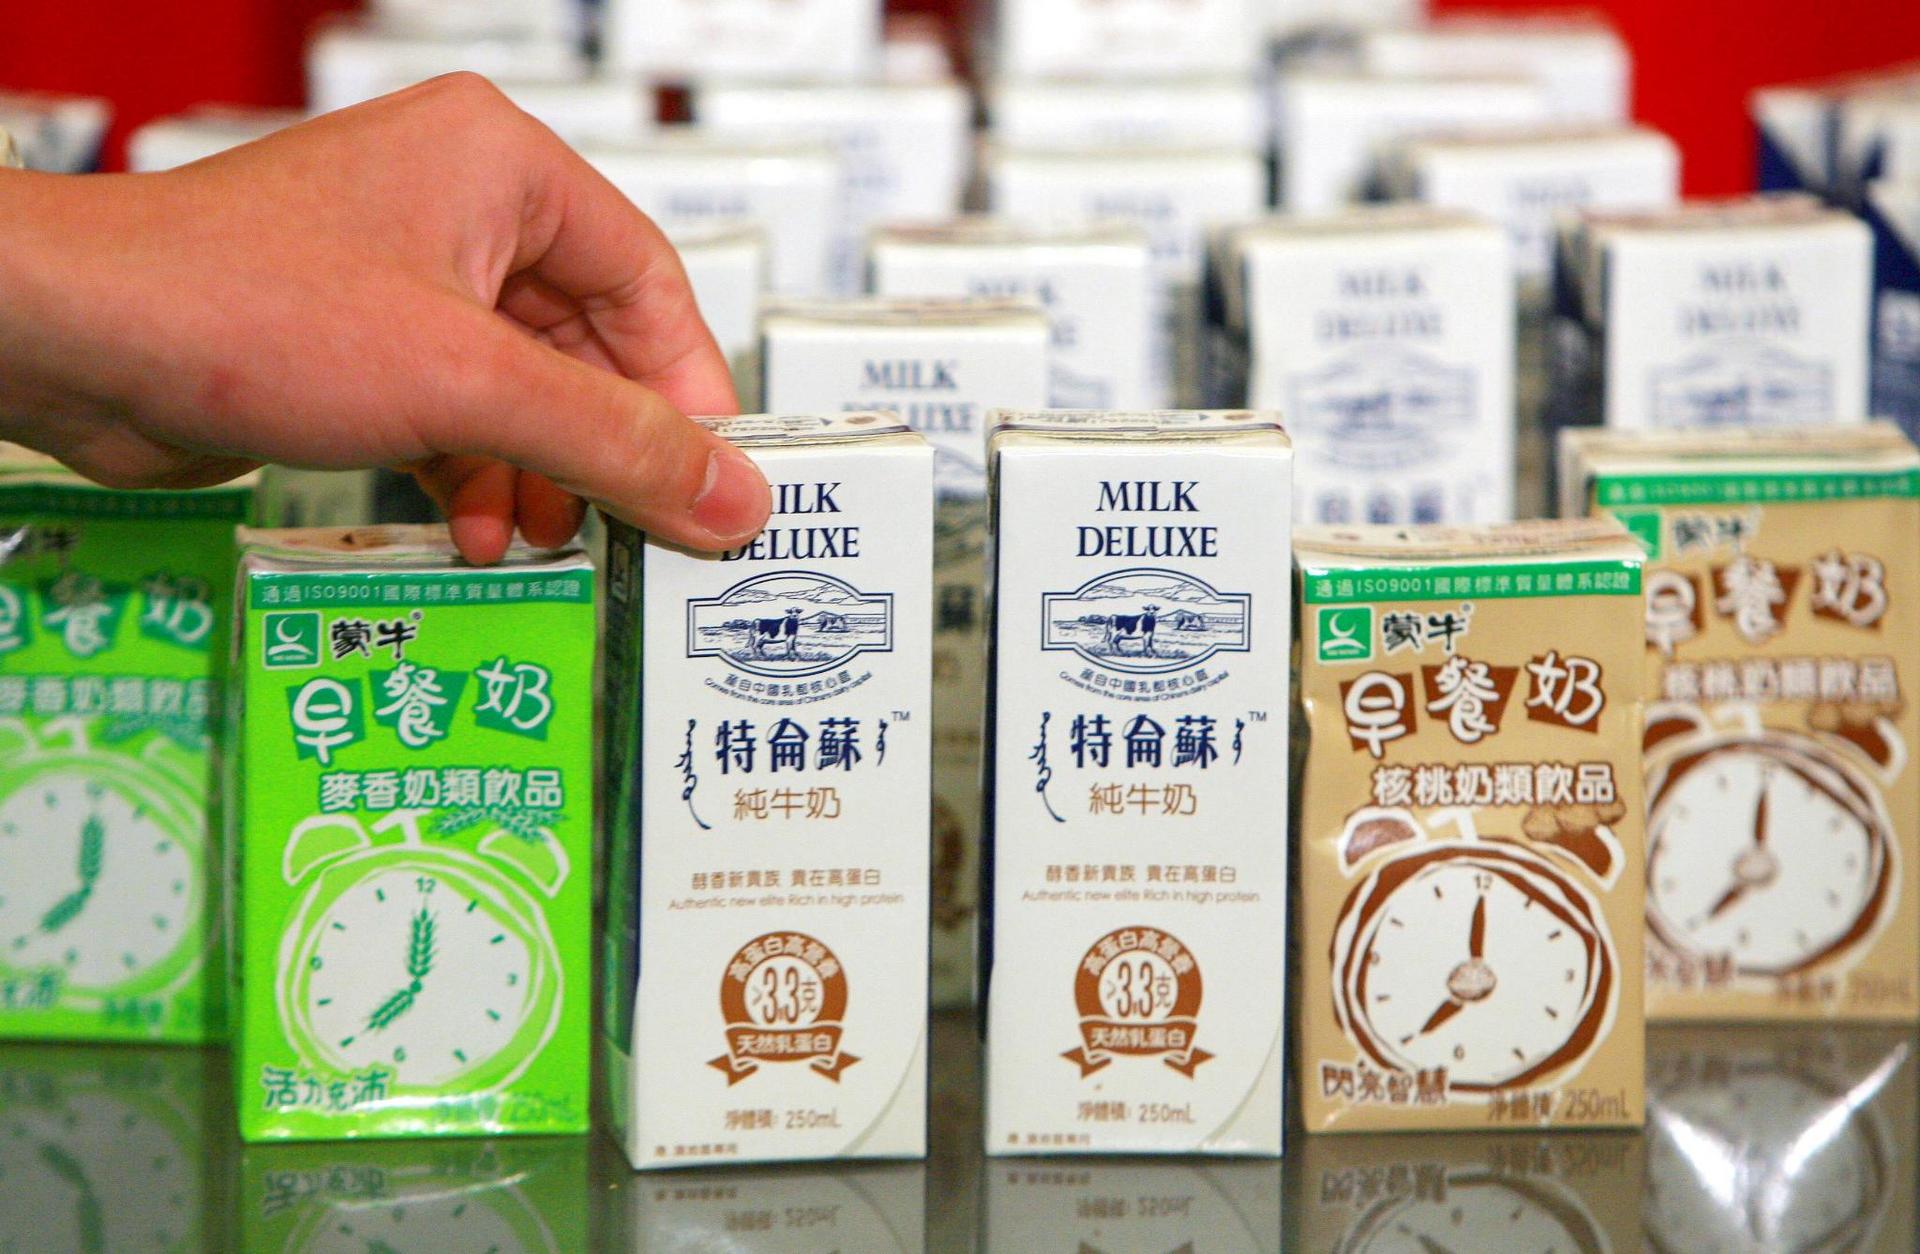 First-half earnings at China Mengniu Dairy fell to 645 million yuan, a result that the company partly attributed to a fall-out from quality-related scandals. Photo: EPA